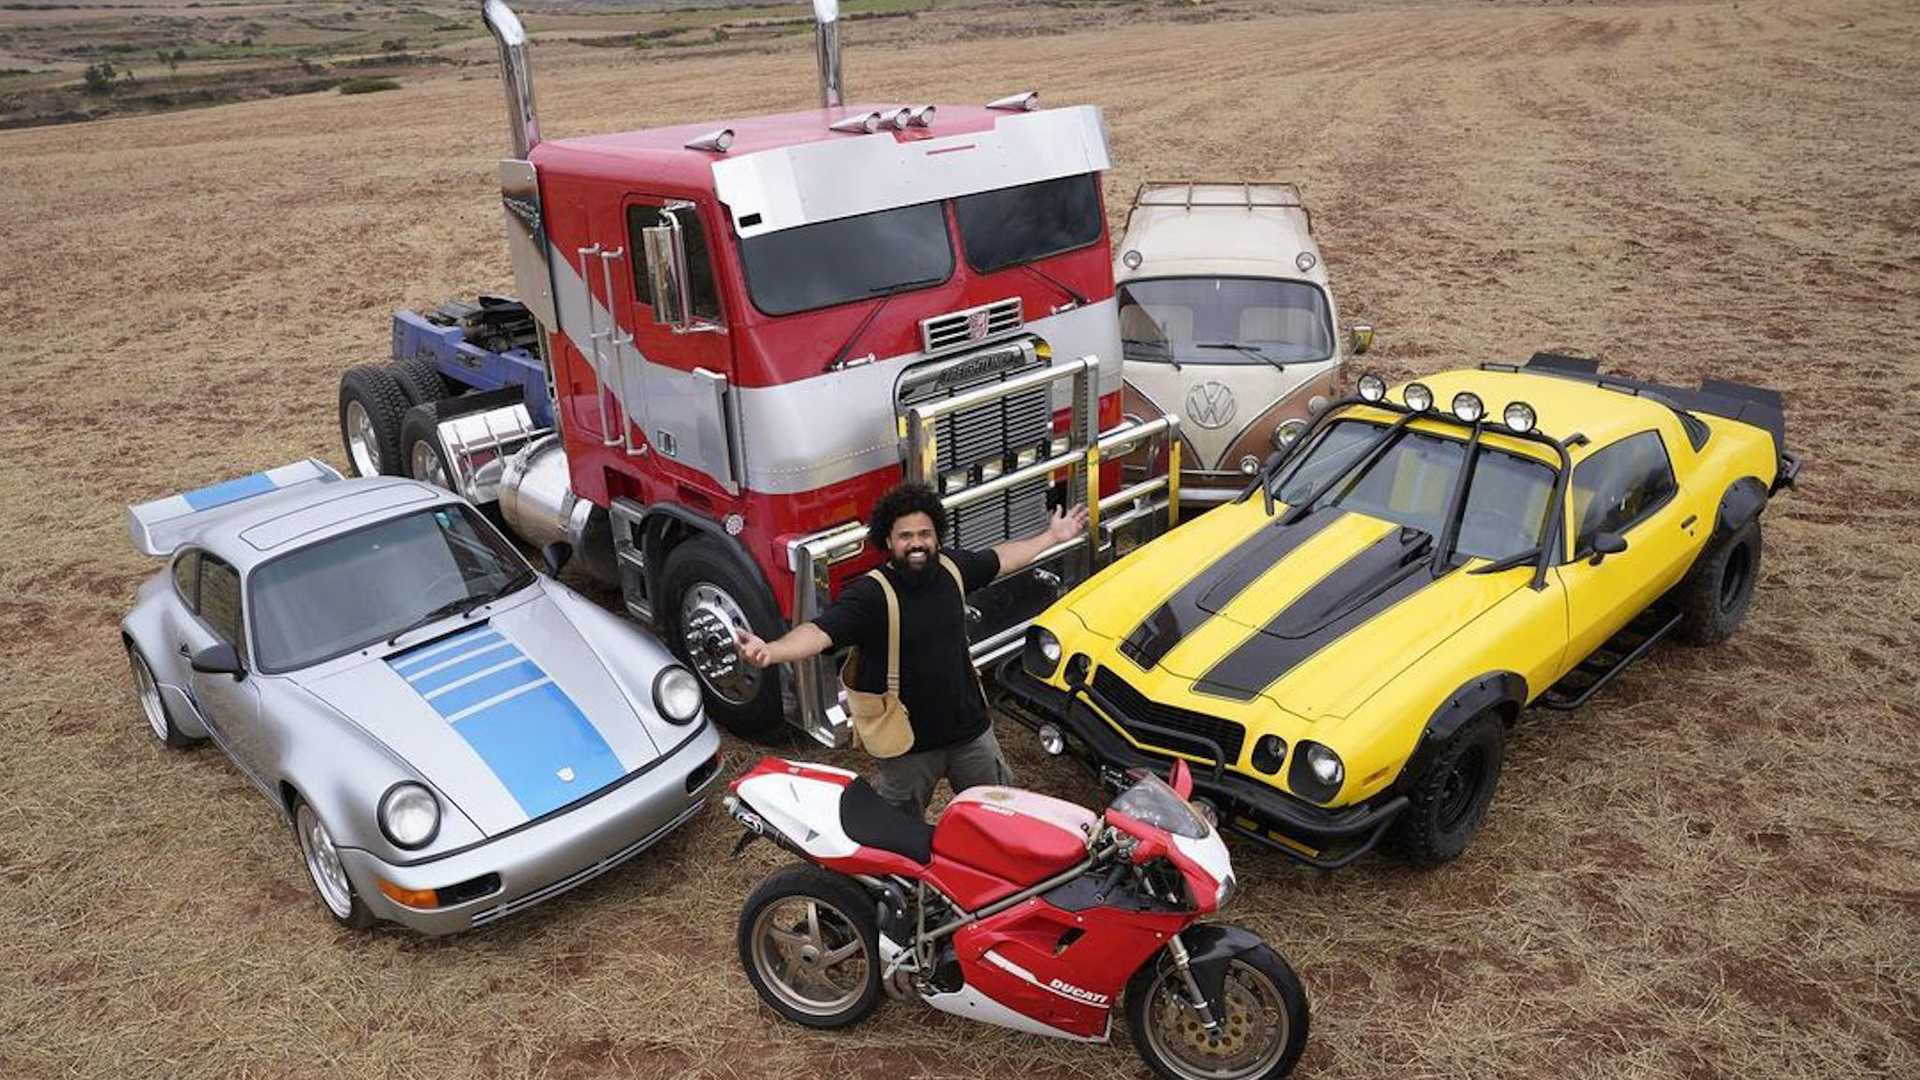 Vehicles from “Transformers: Rise of the Beasts” - Photo credit: Steven Caple Jr./Instagram